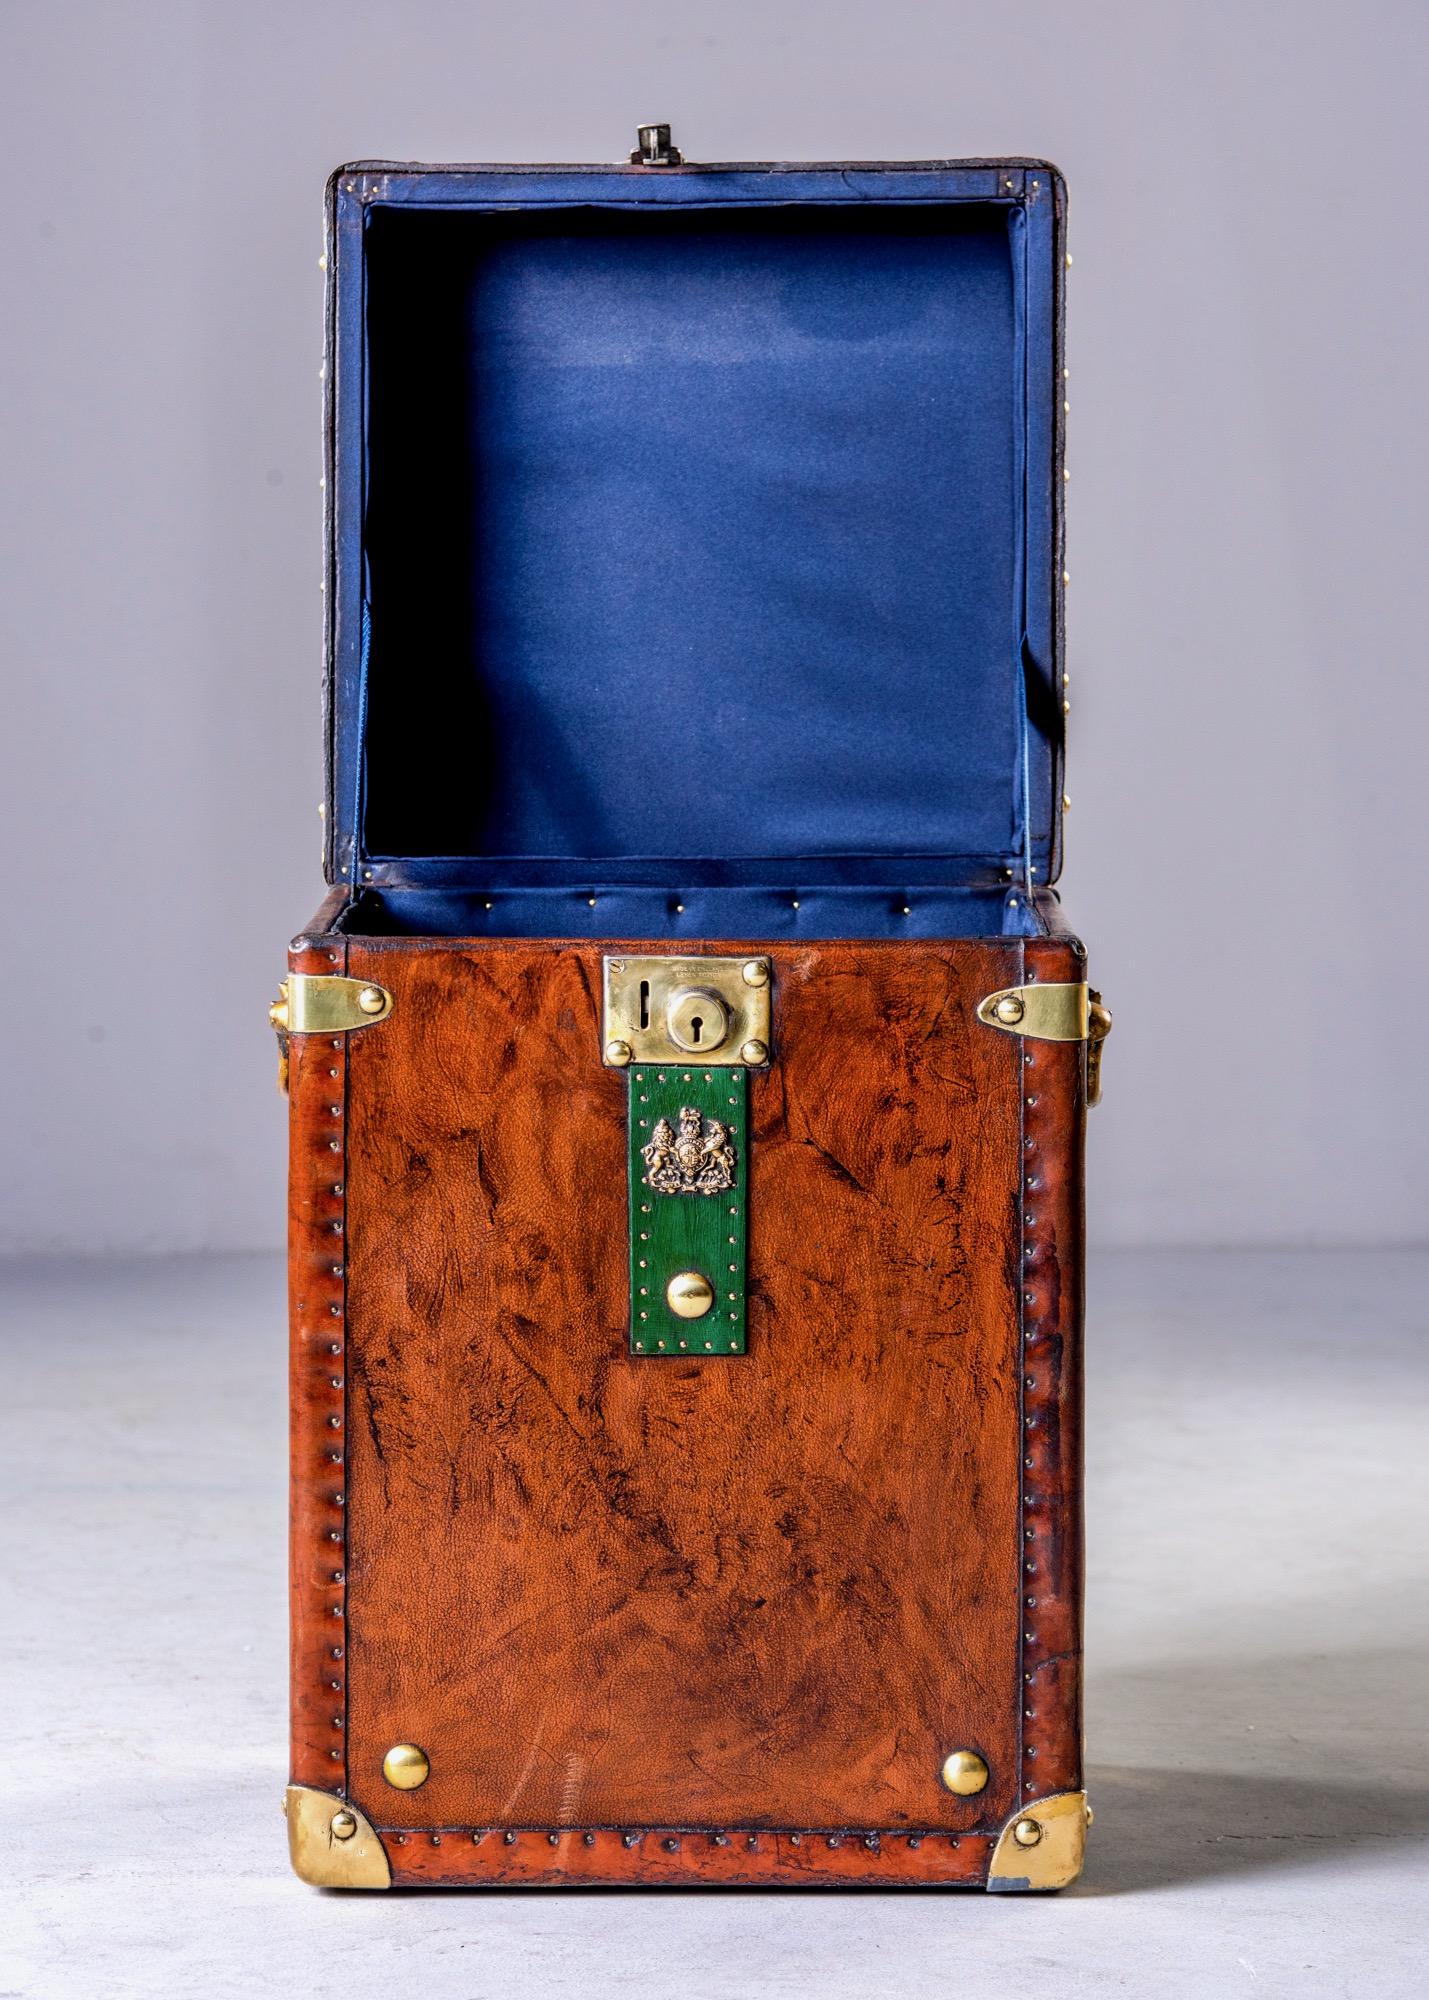 English trunk with restored leather cover, brass hardware, green strap and new blue velour lining, circa 1900s. Makes a great unique side table. Unknown maker.